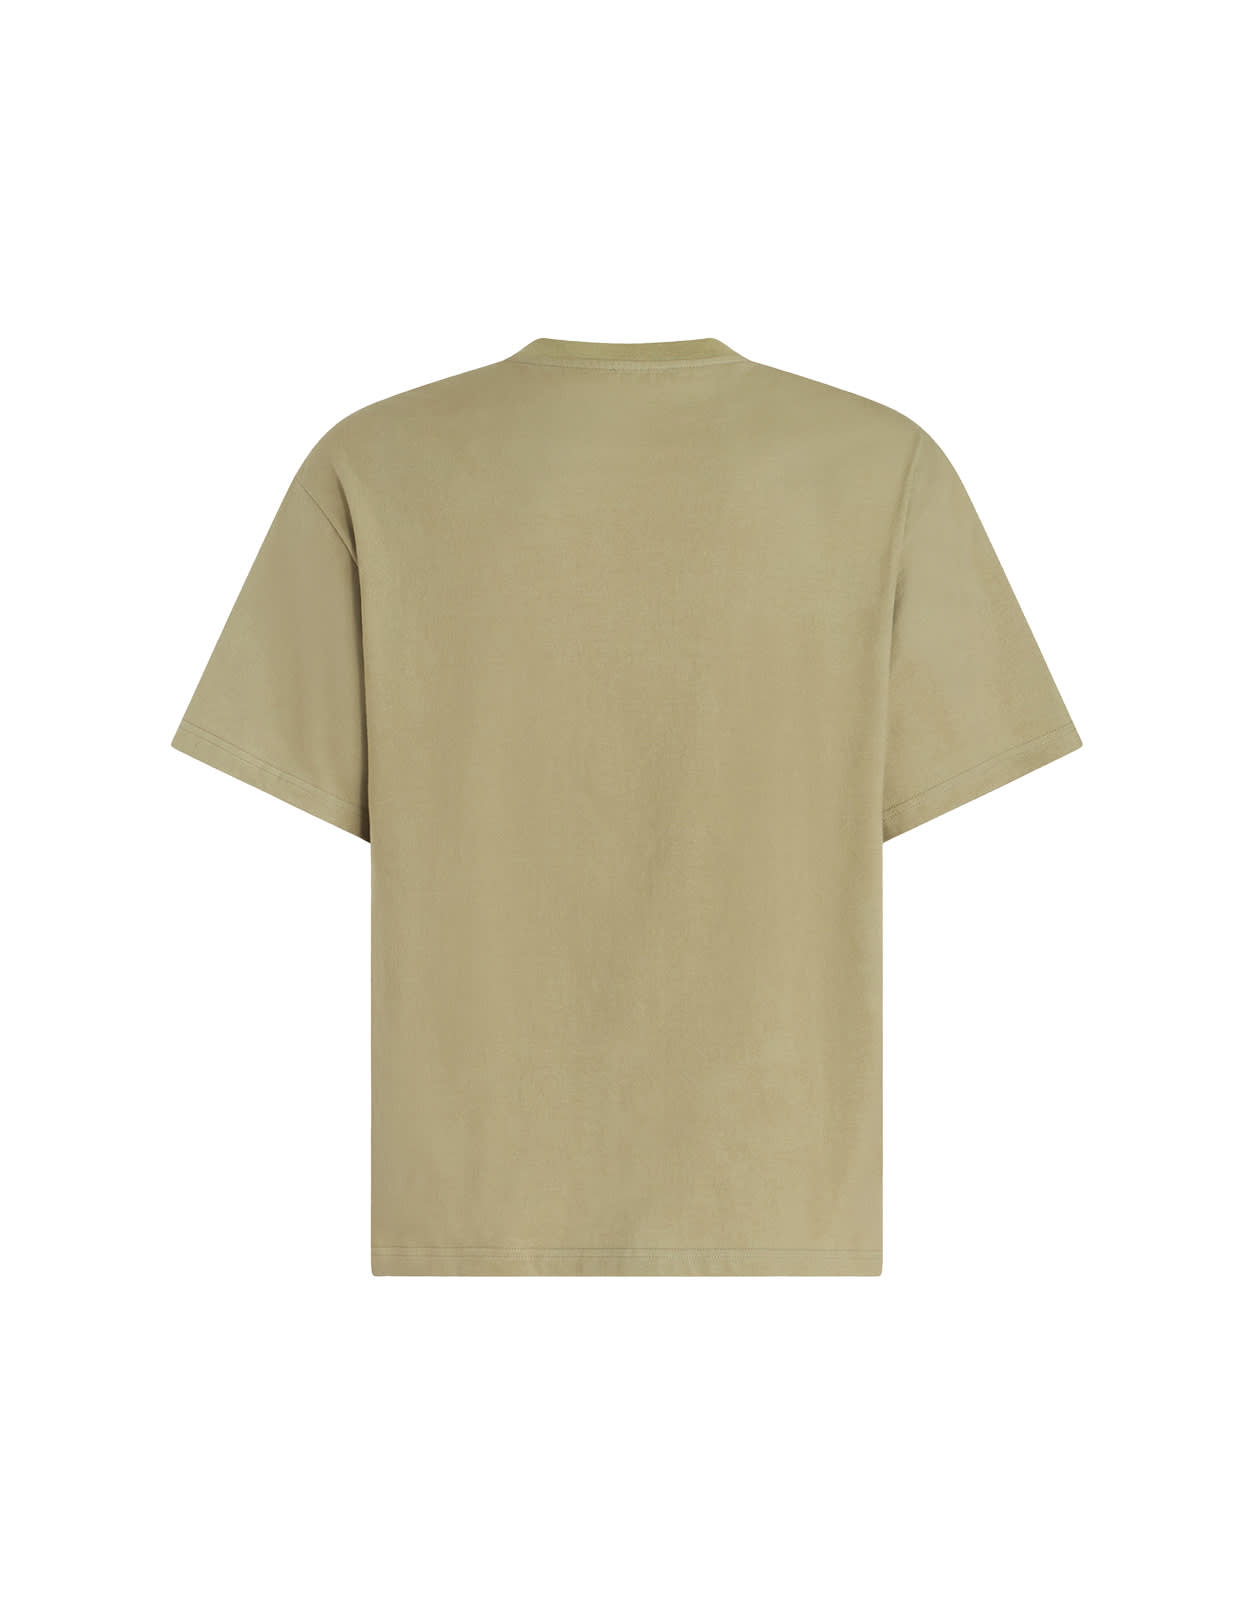 Shop Etro Olive Green T-shirt With Graphic Print